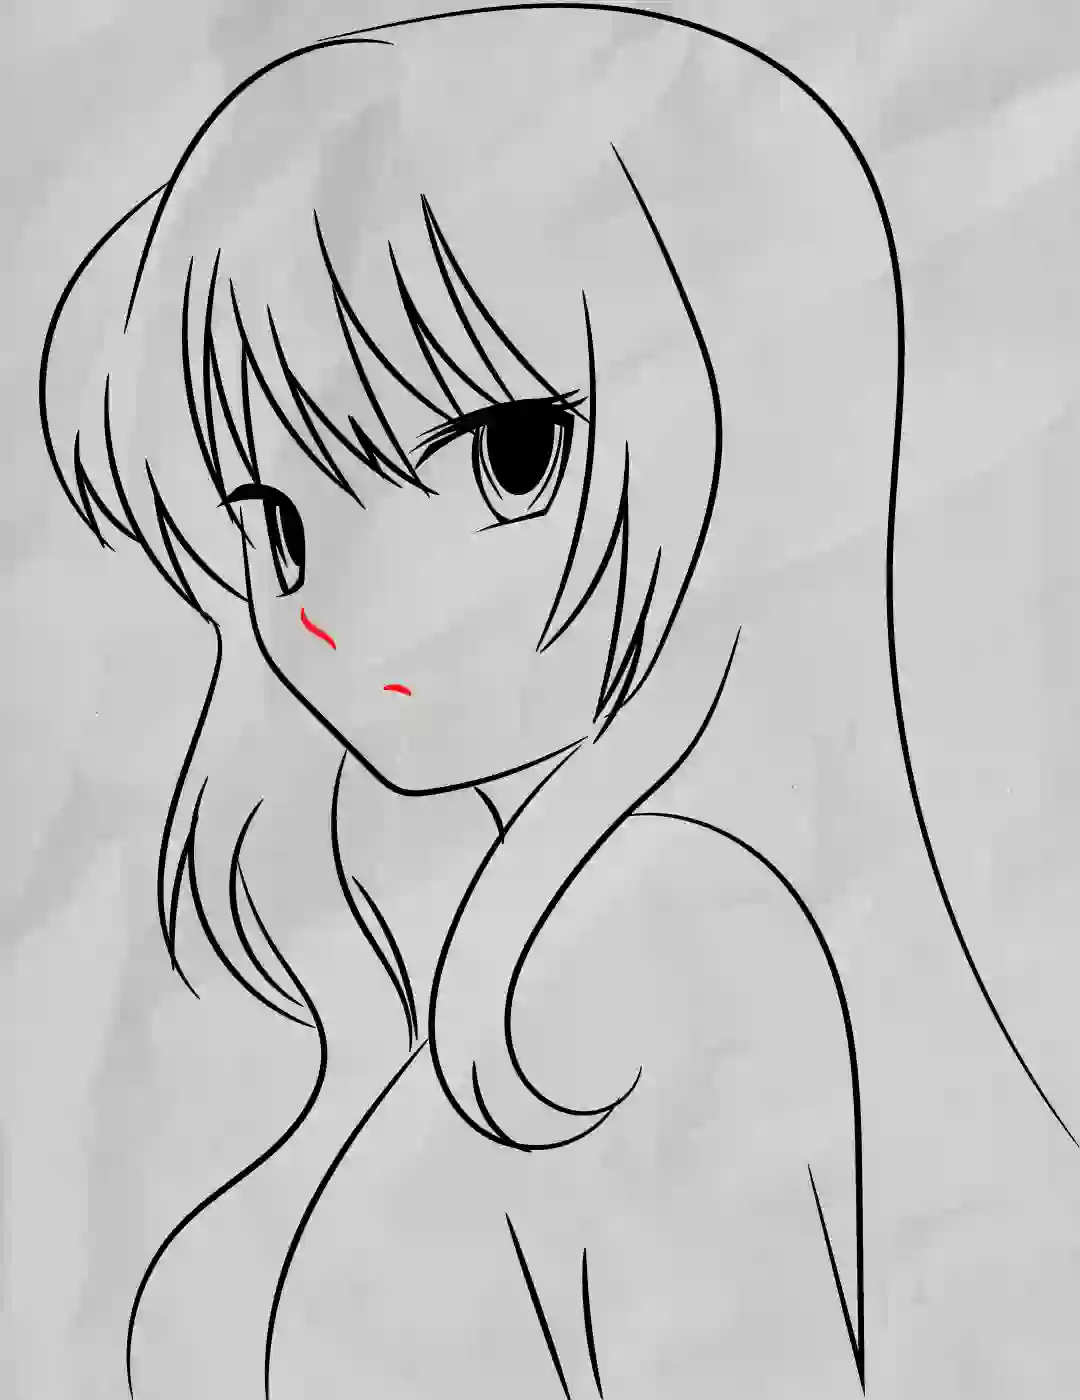 How to Draw a Manga Girl Full Body Front View  StepbyStep Pictures   How 2 Draw Manga